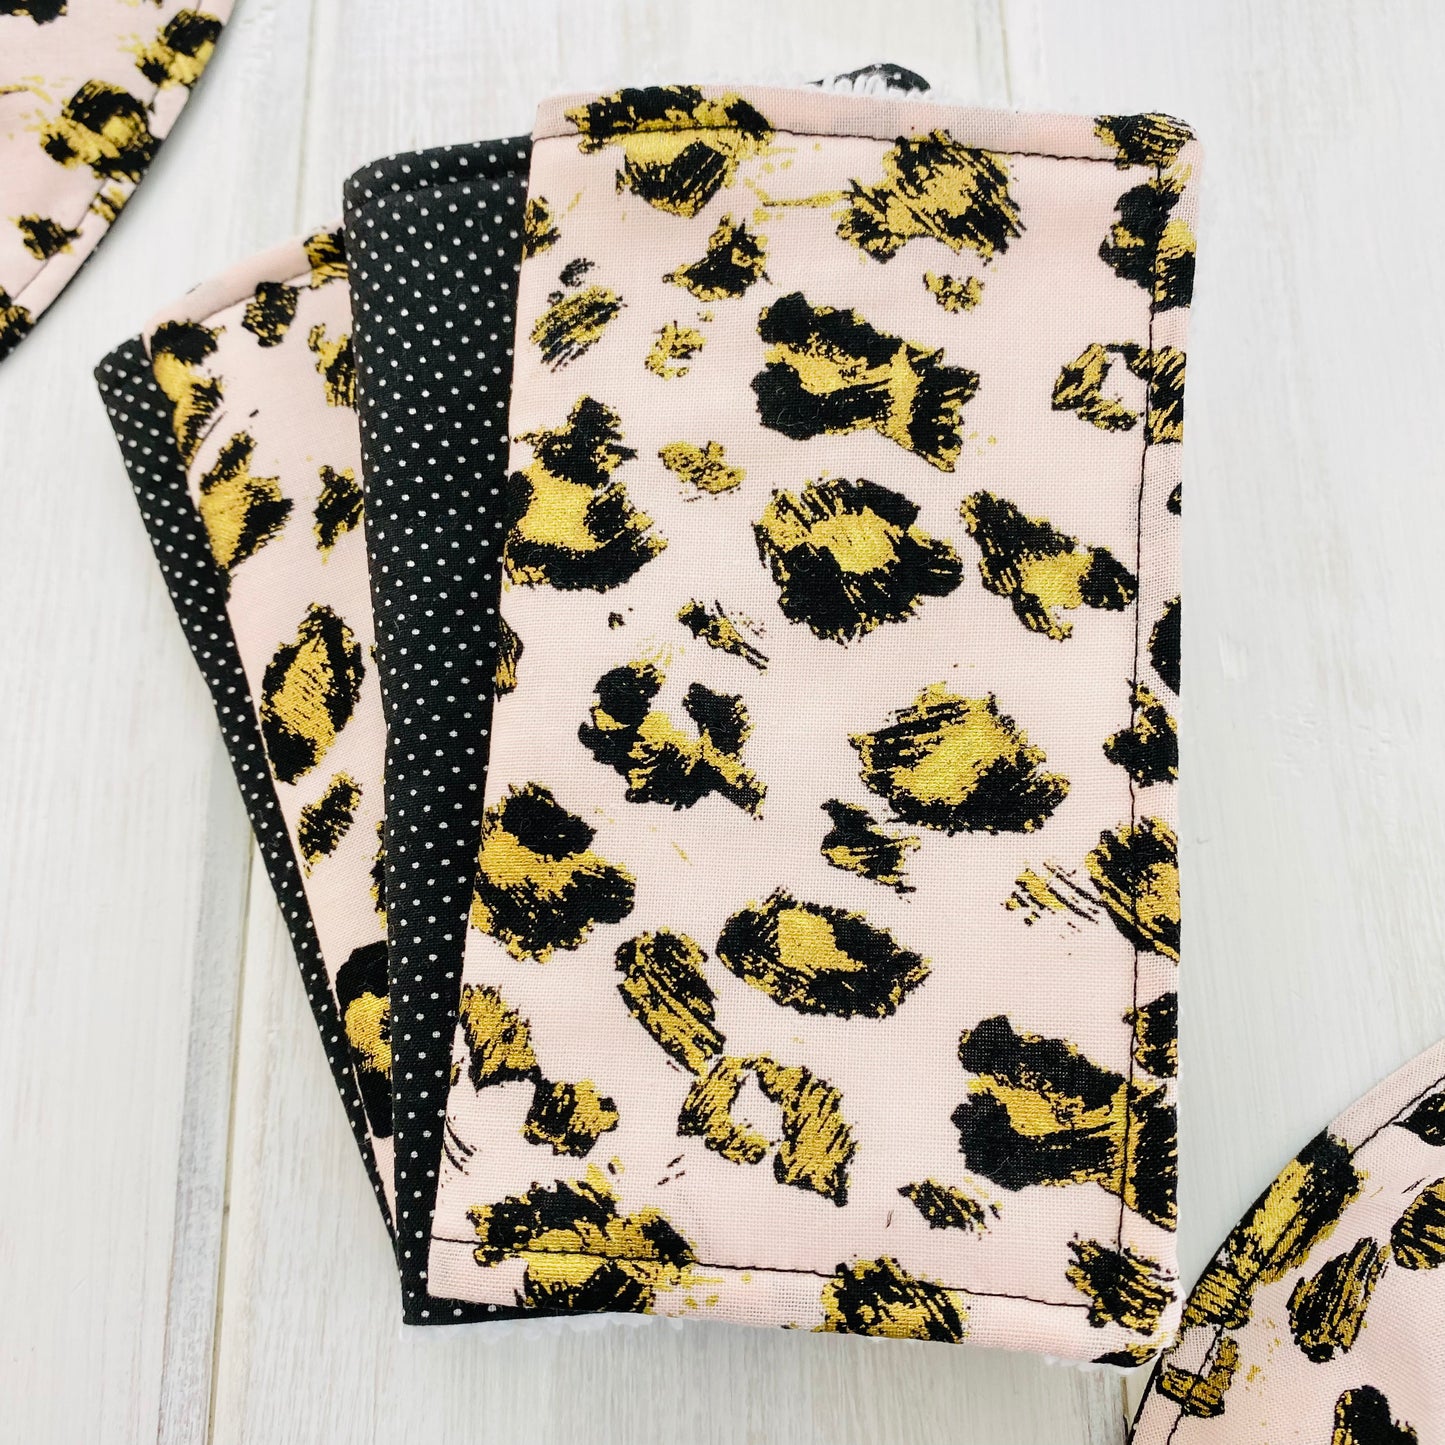 Blush pink cheetah animal print fabric with black and gold accents set of 4 handmade washing cloths.